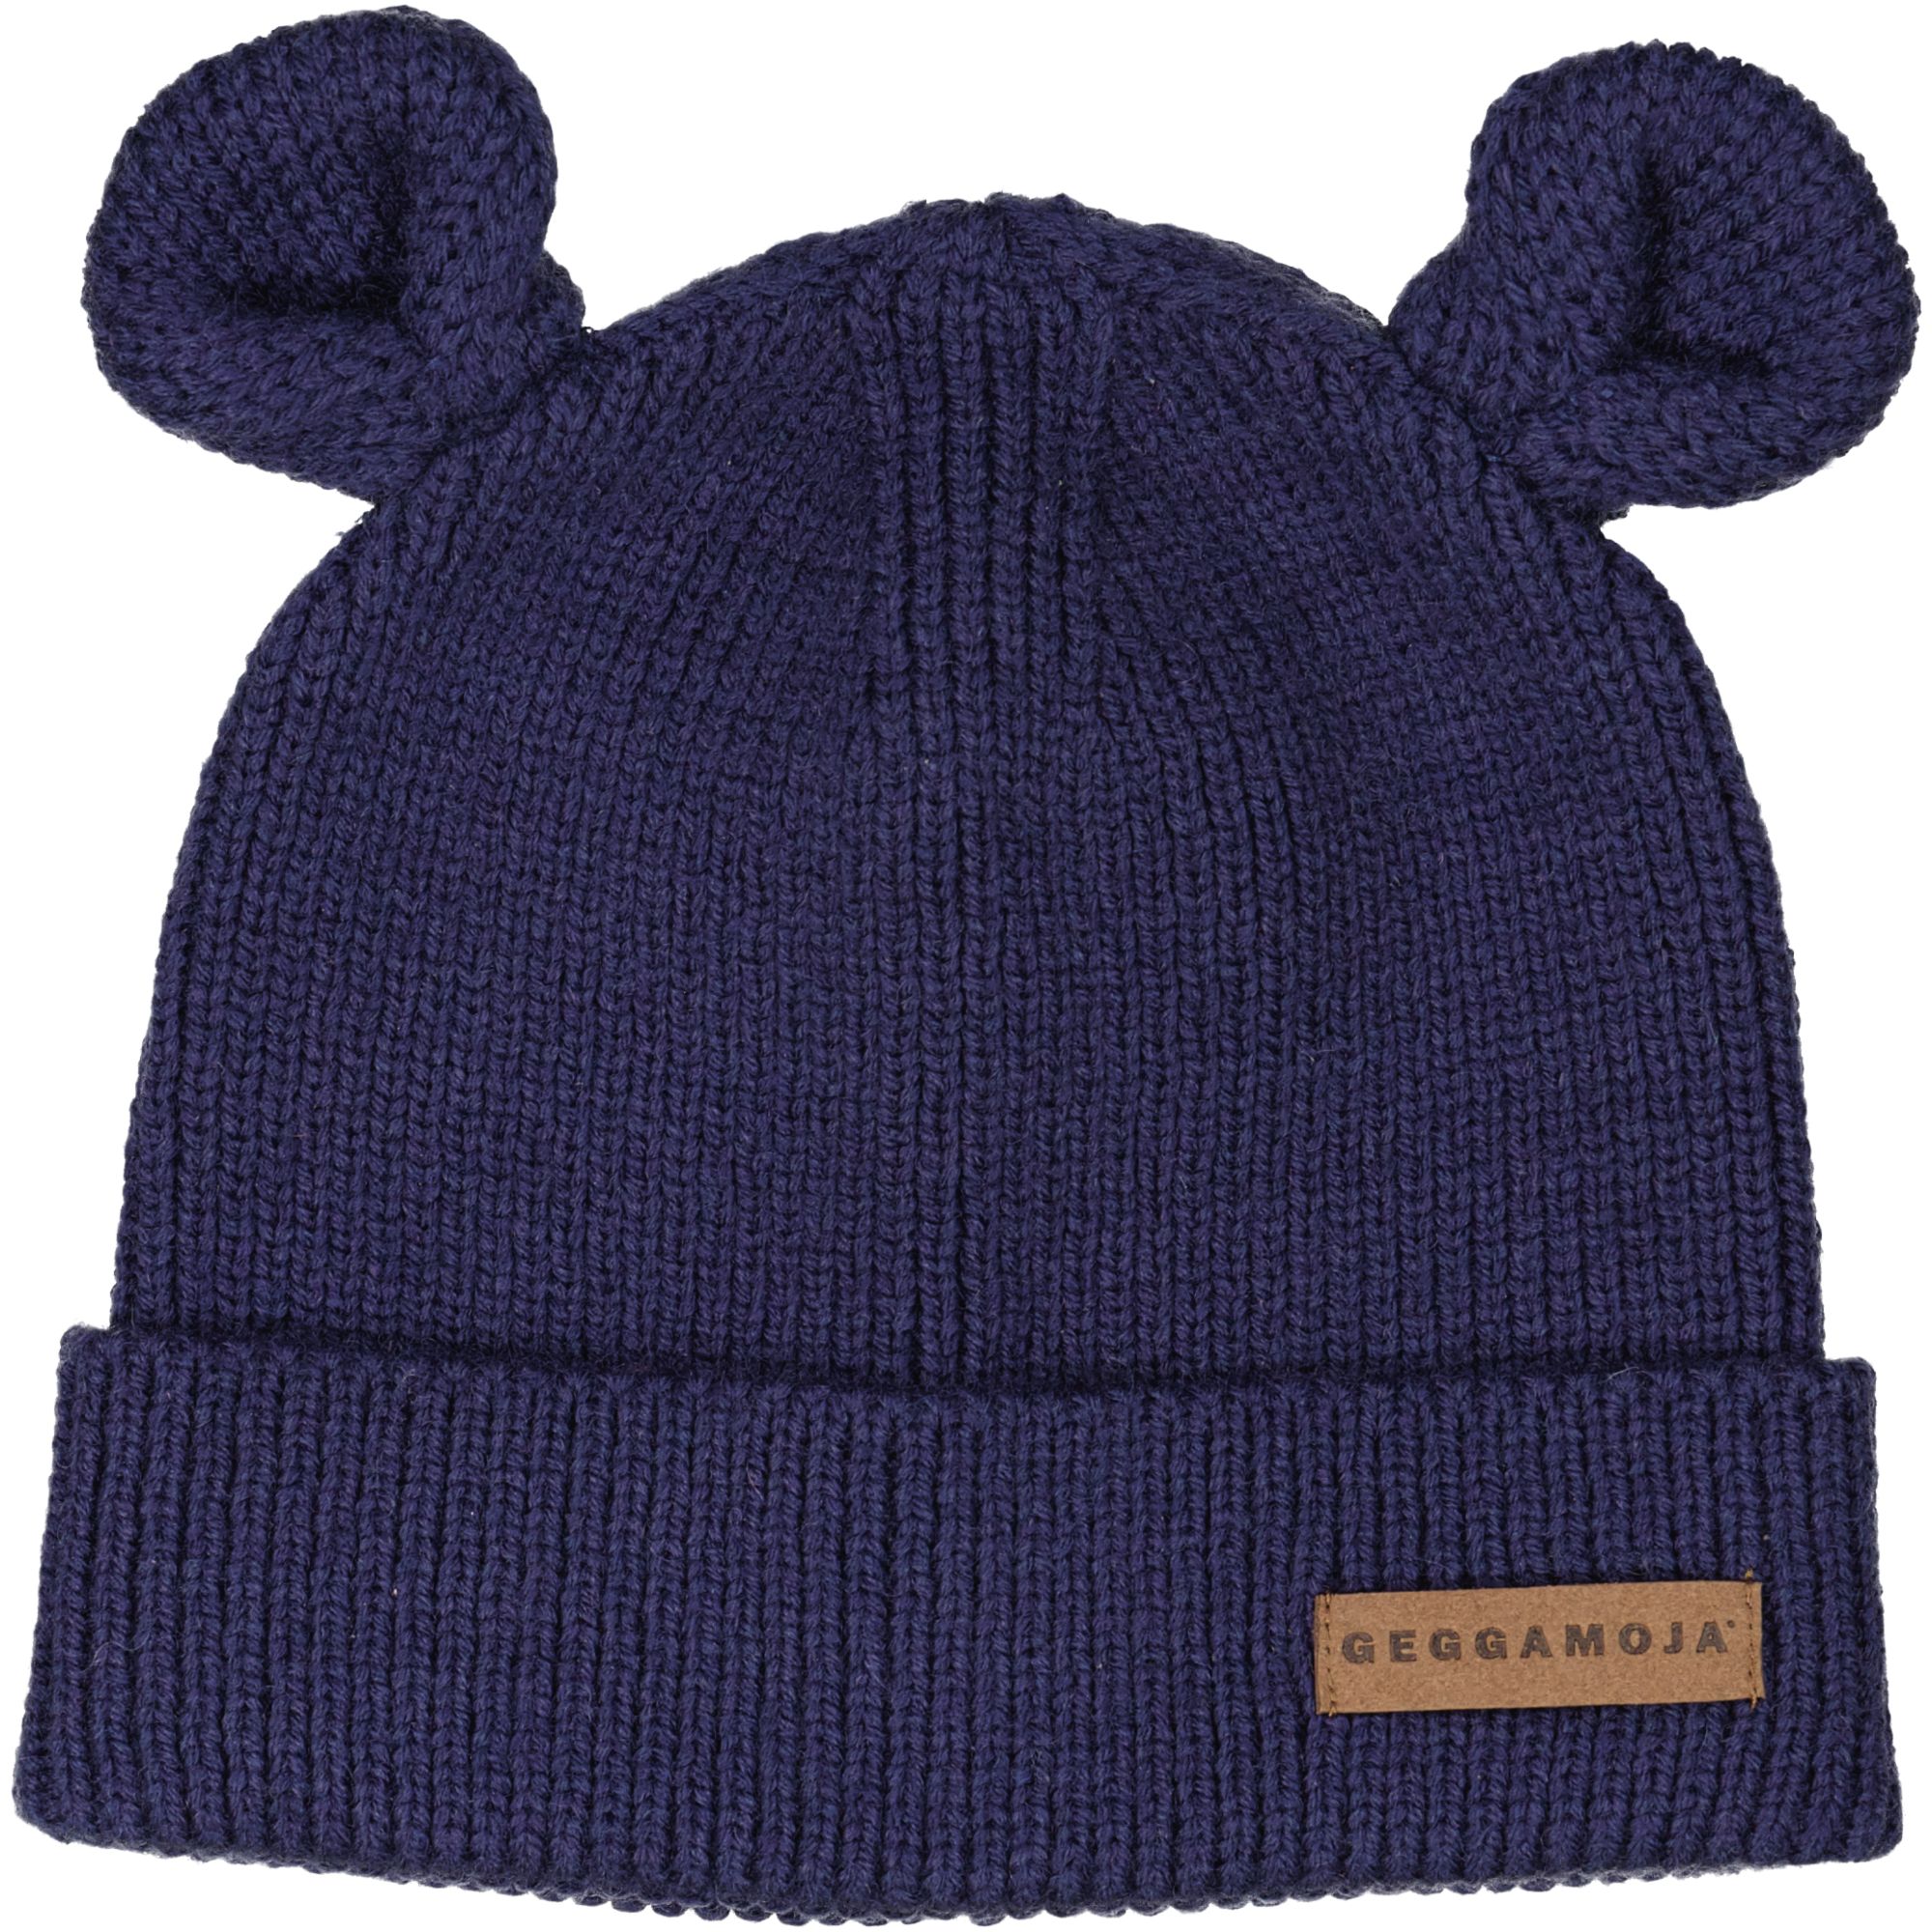 Knitted beanie ears Navy